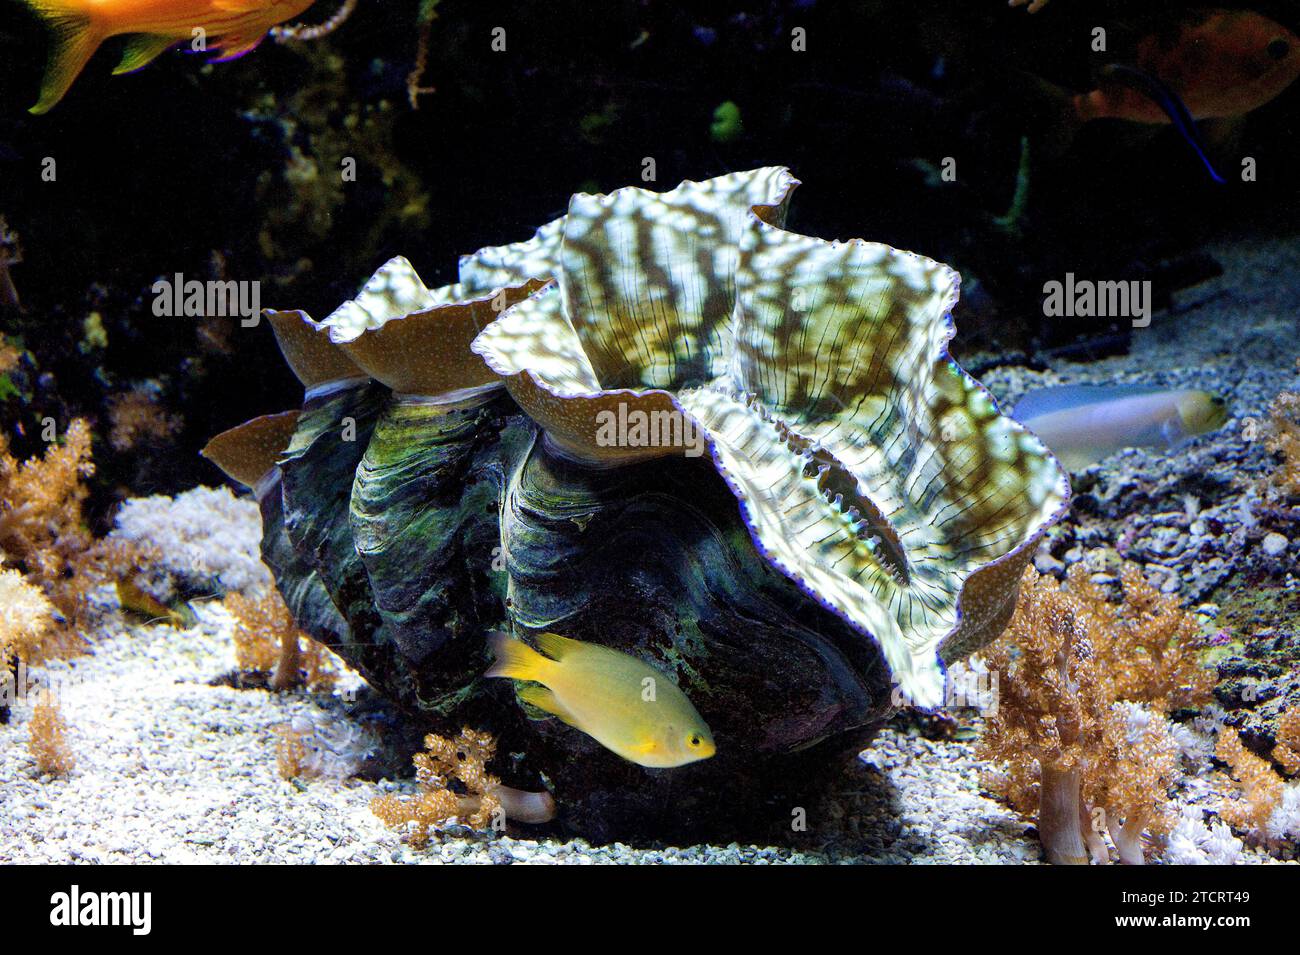 Tridacna derasa is a large bivalve mollusk who lives in tropical seas. Stock Photo